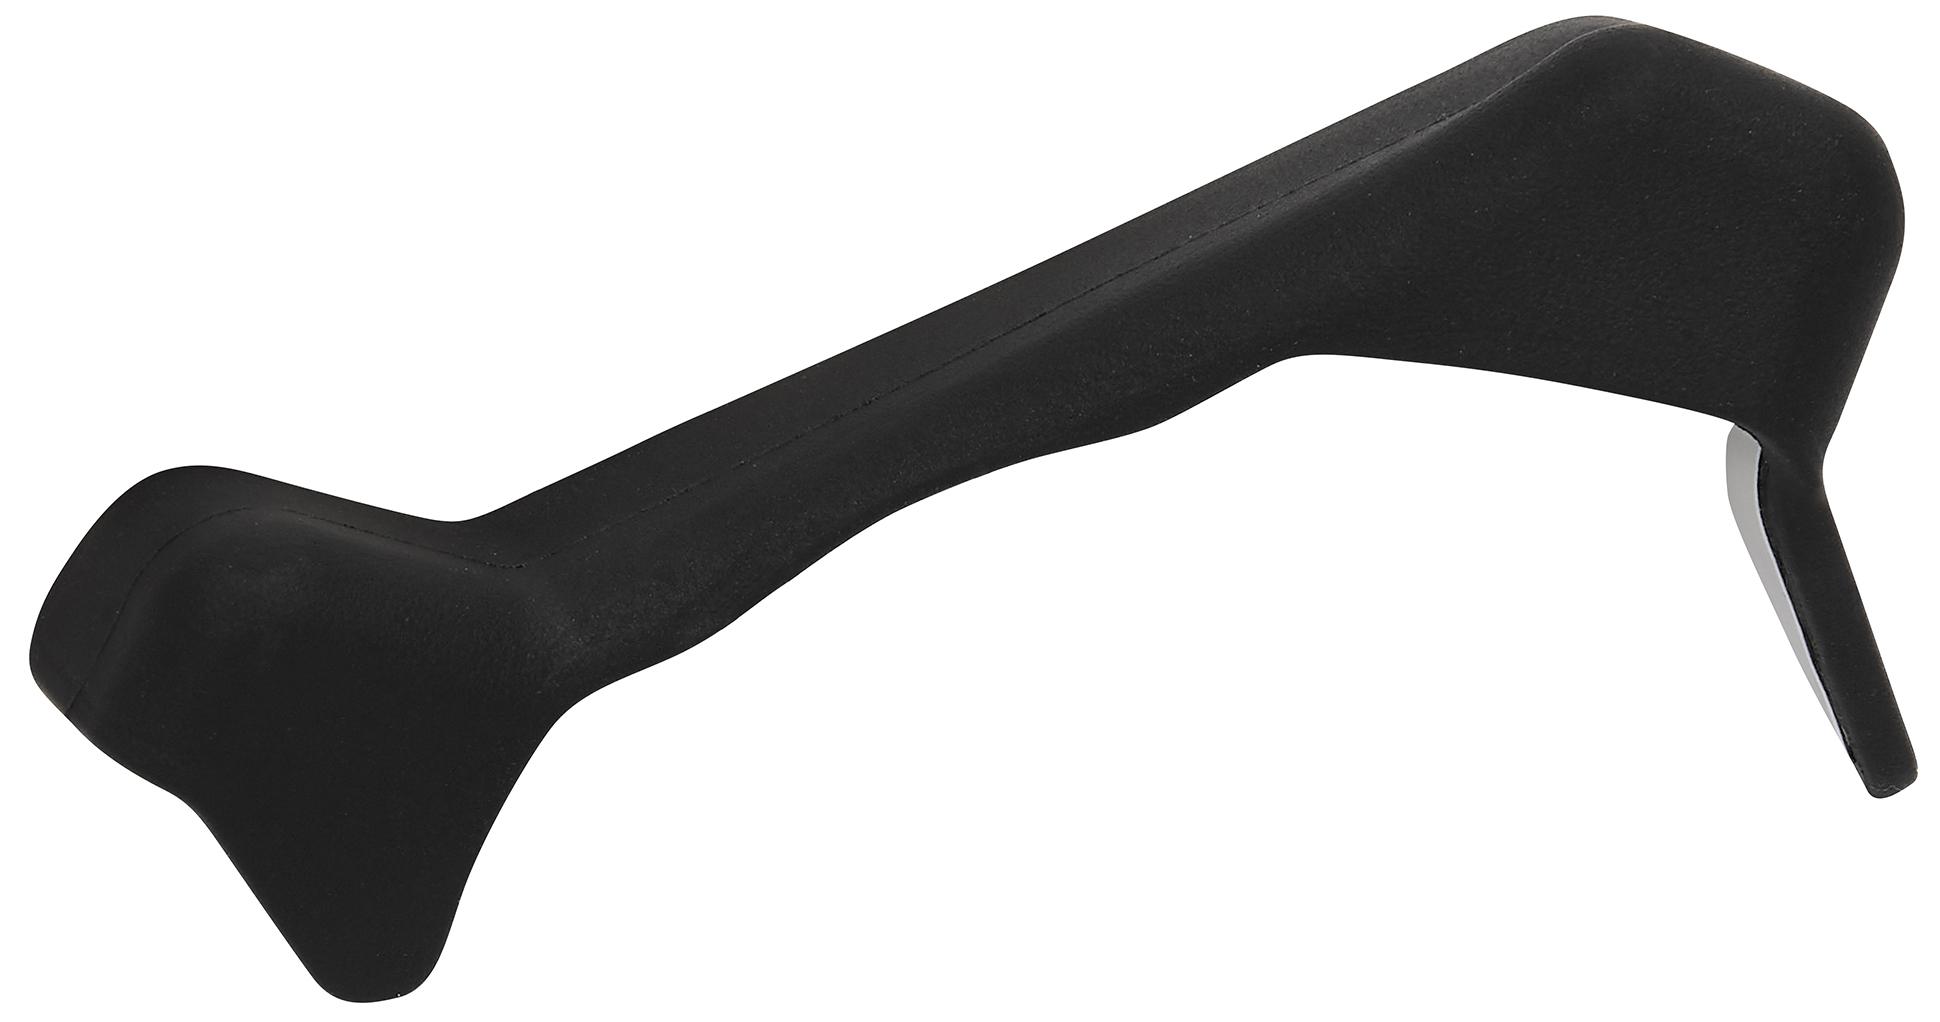 Nukeproof Dissent Carbon Iscg Protector - Black